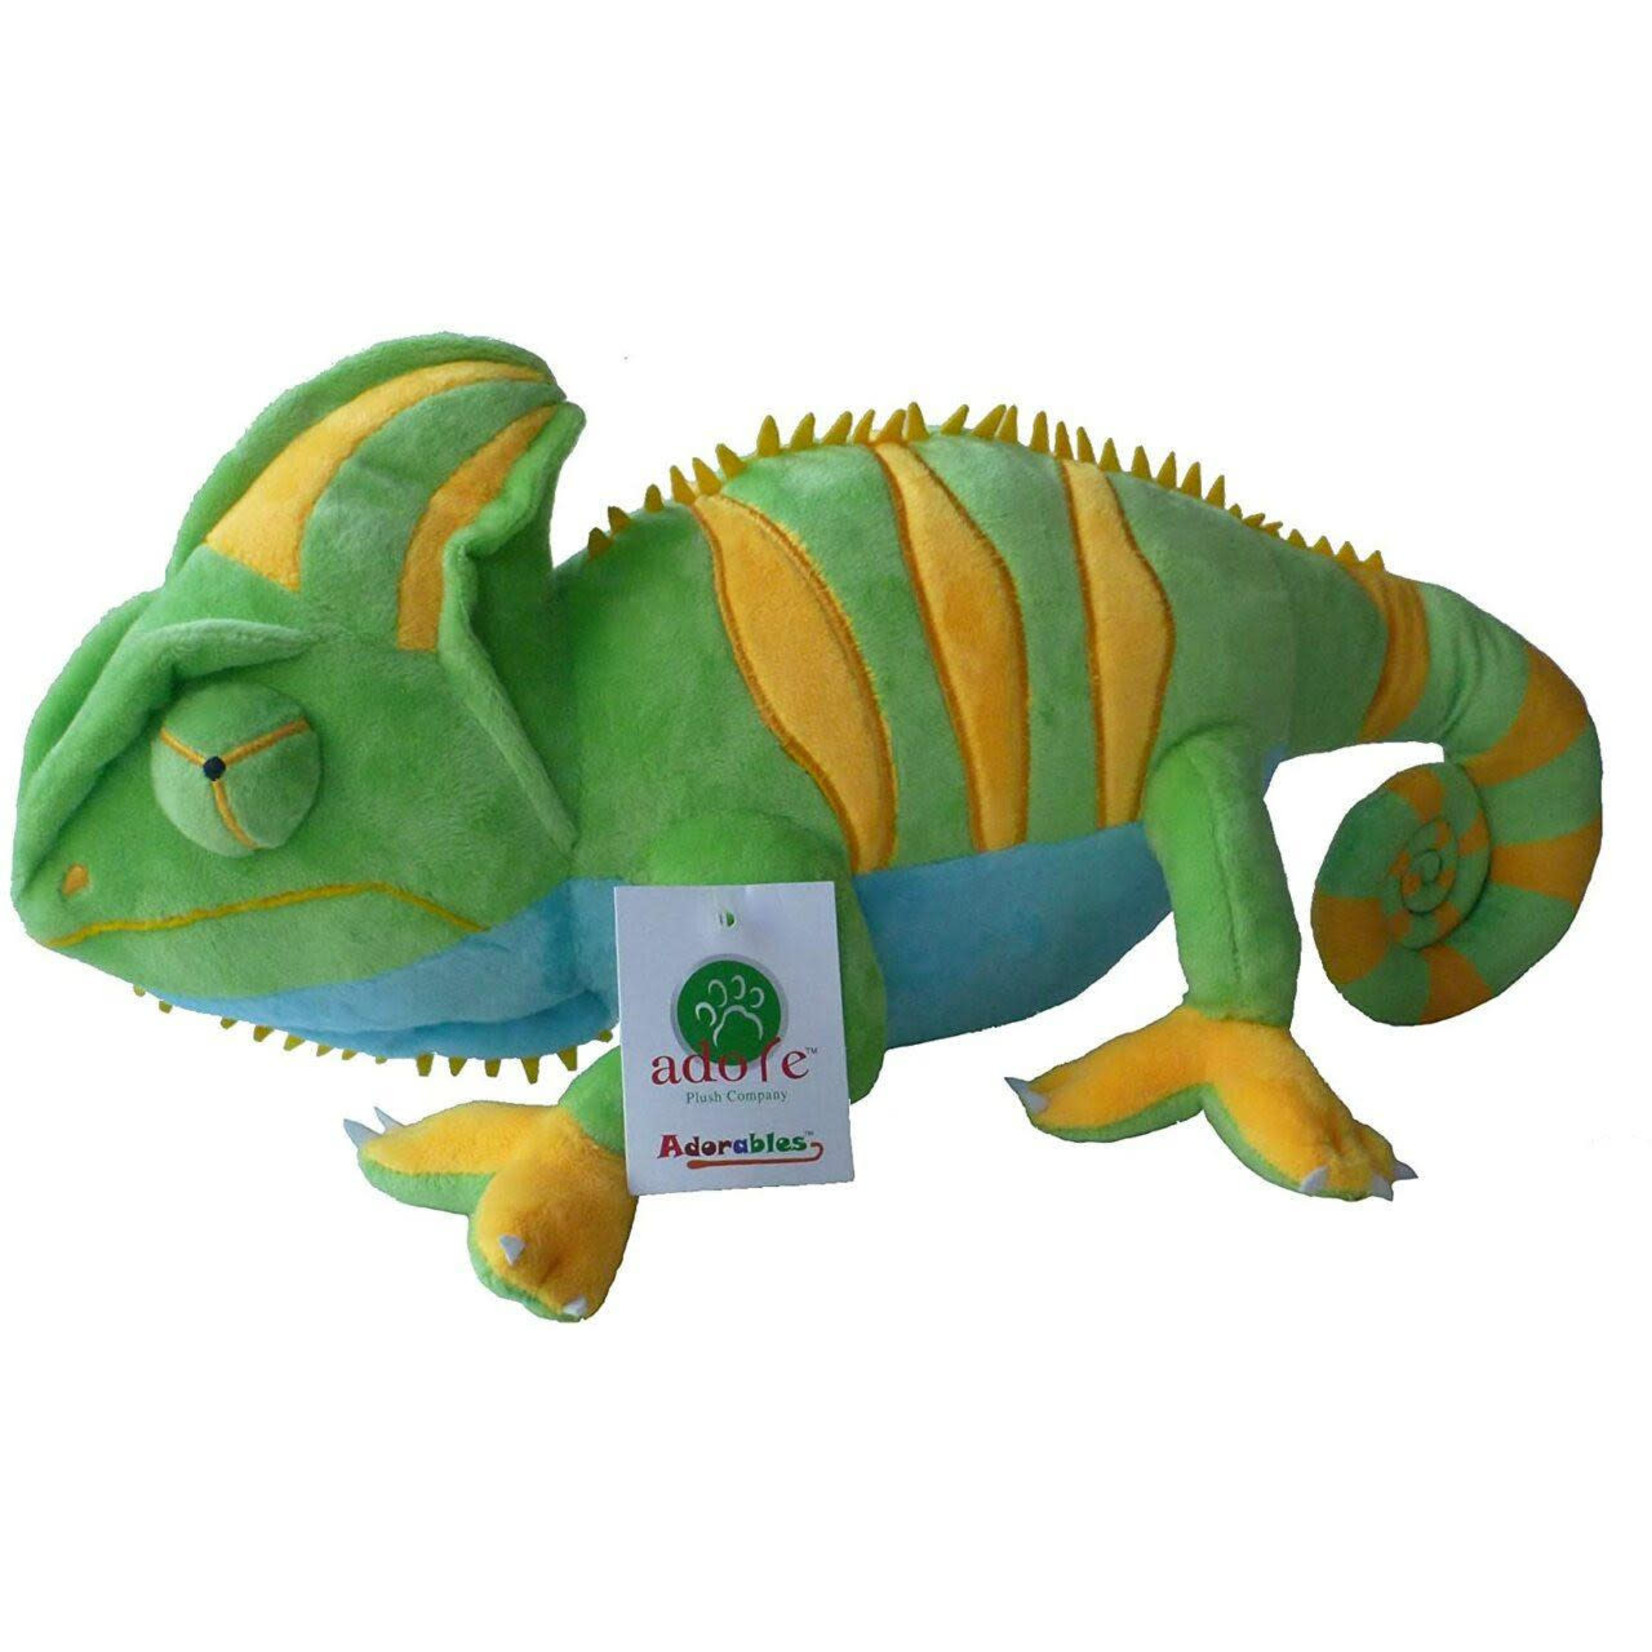 Cham the Chameleon Stuffed Toy Plushie 16 - Rick's Pet Stores Inc.